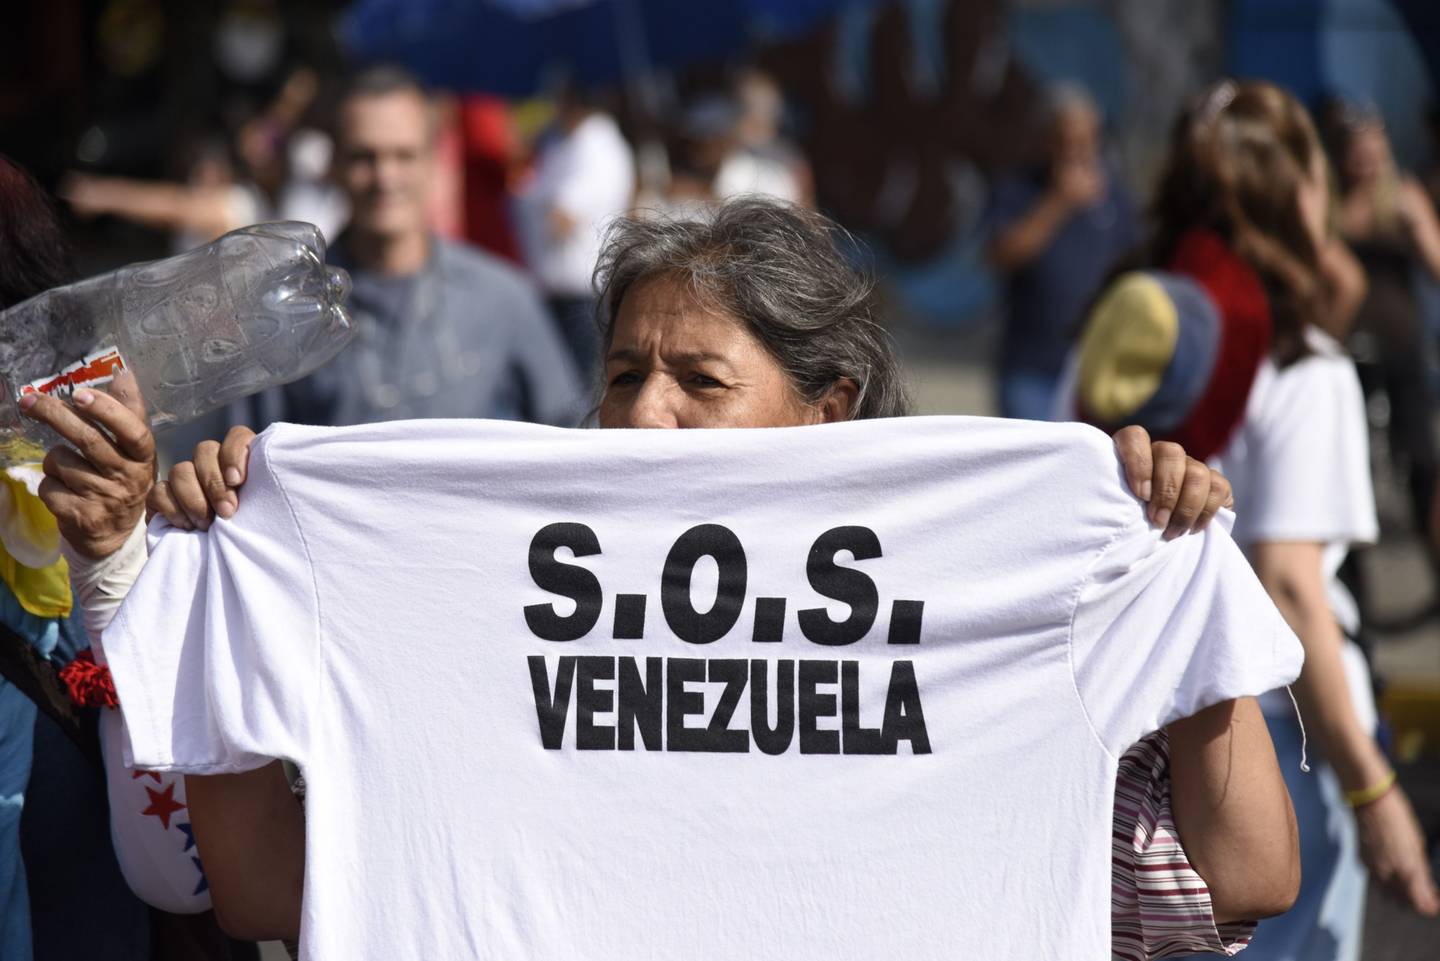 A participant holds a T-shirt during a protest against Venezuelan President Nicolas Maduro in Caracas, Venezuela, on Tuesday, March 12, 2019. Caracas began going dry Monday as the countrys power crisis put utilities out of commission, risking supplies for 5.5 million people. Photographer: Carlos Becerra/Bloomberg